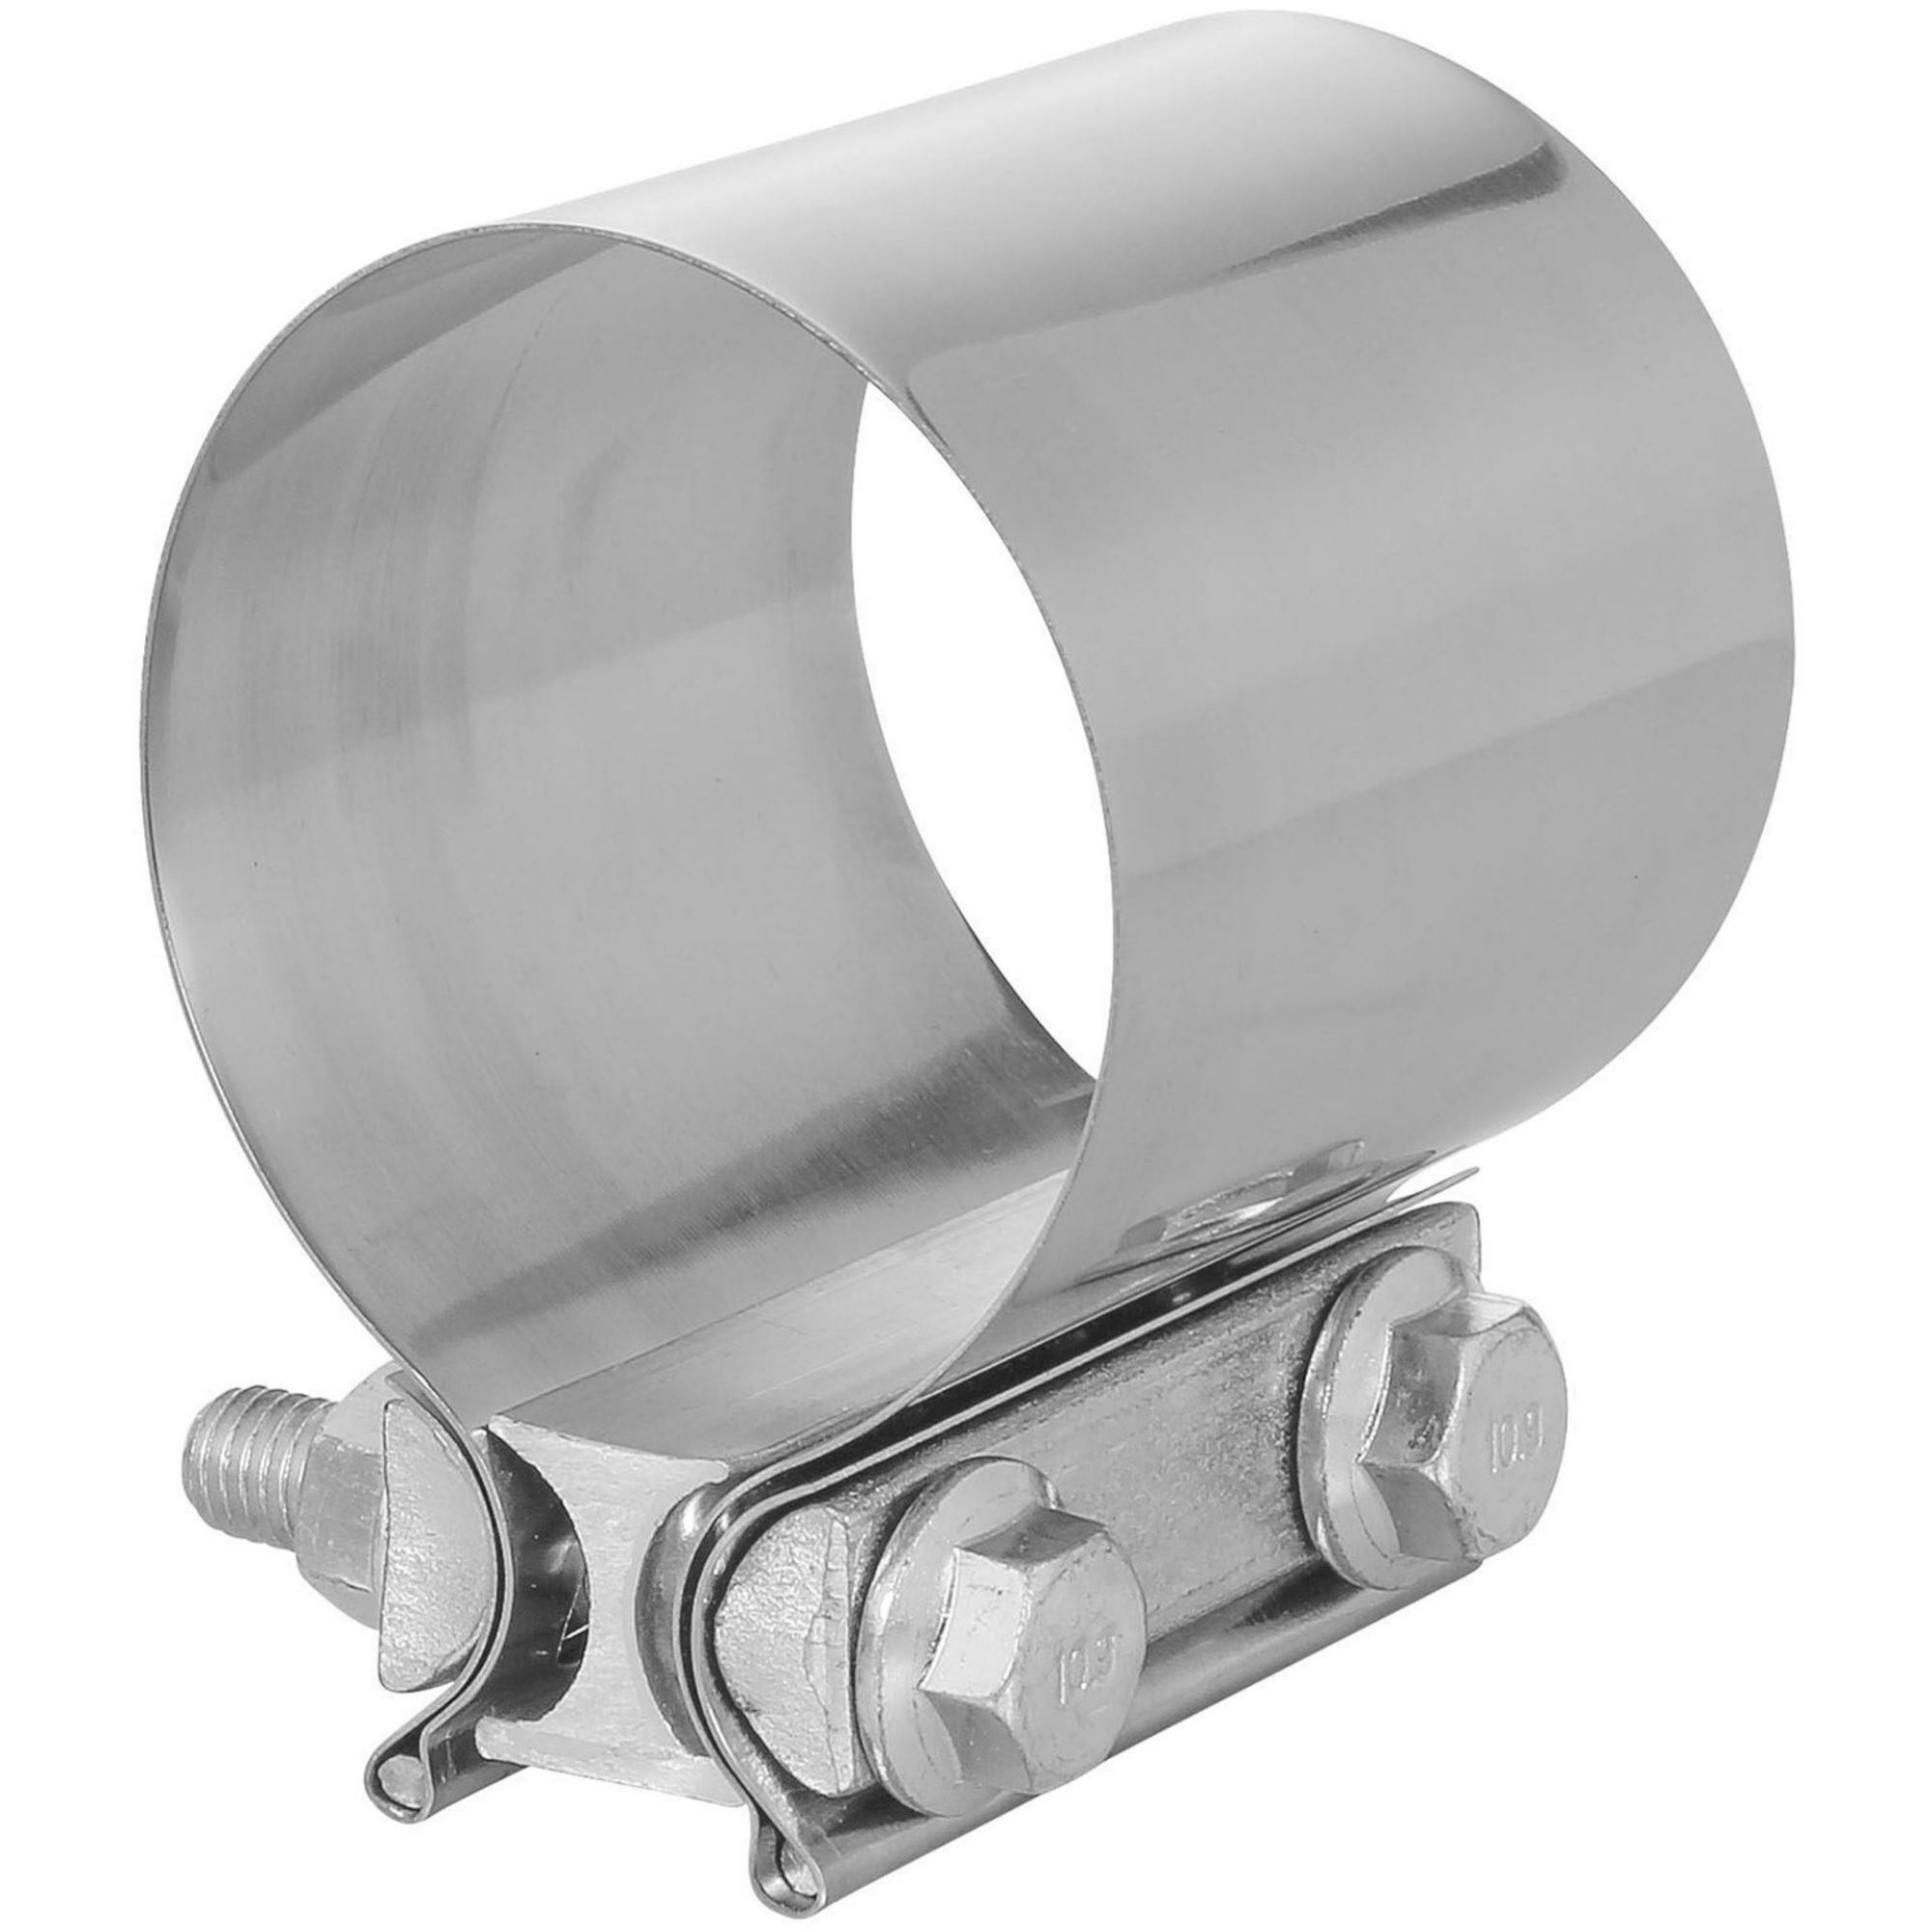 TOTALFLOW 5 TF-JB64 304 Stainless Steel Butt Joint Exhaust Muffler Clamp Band-5 inch